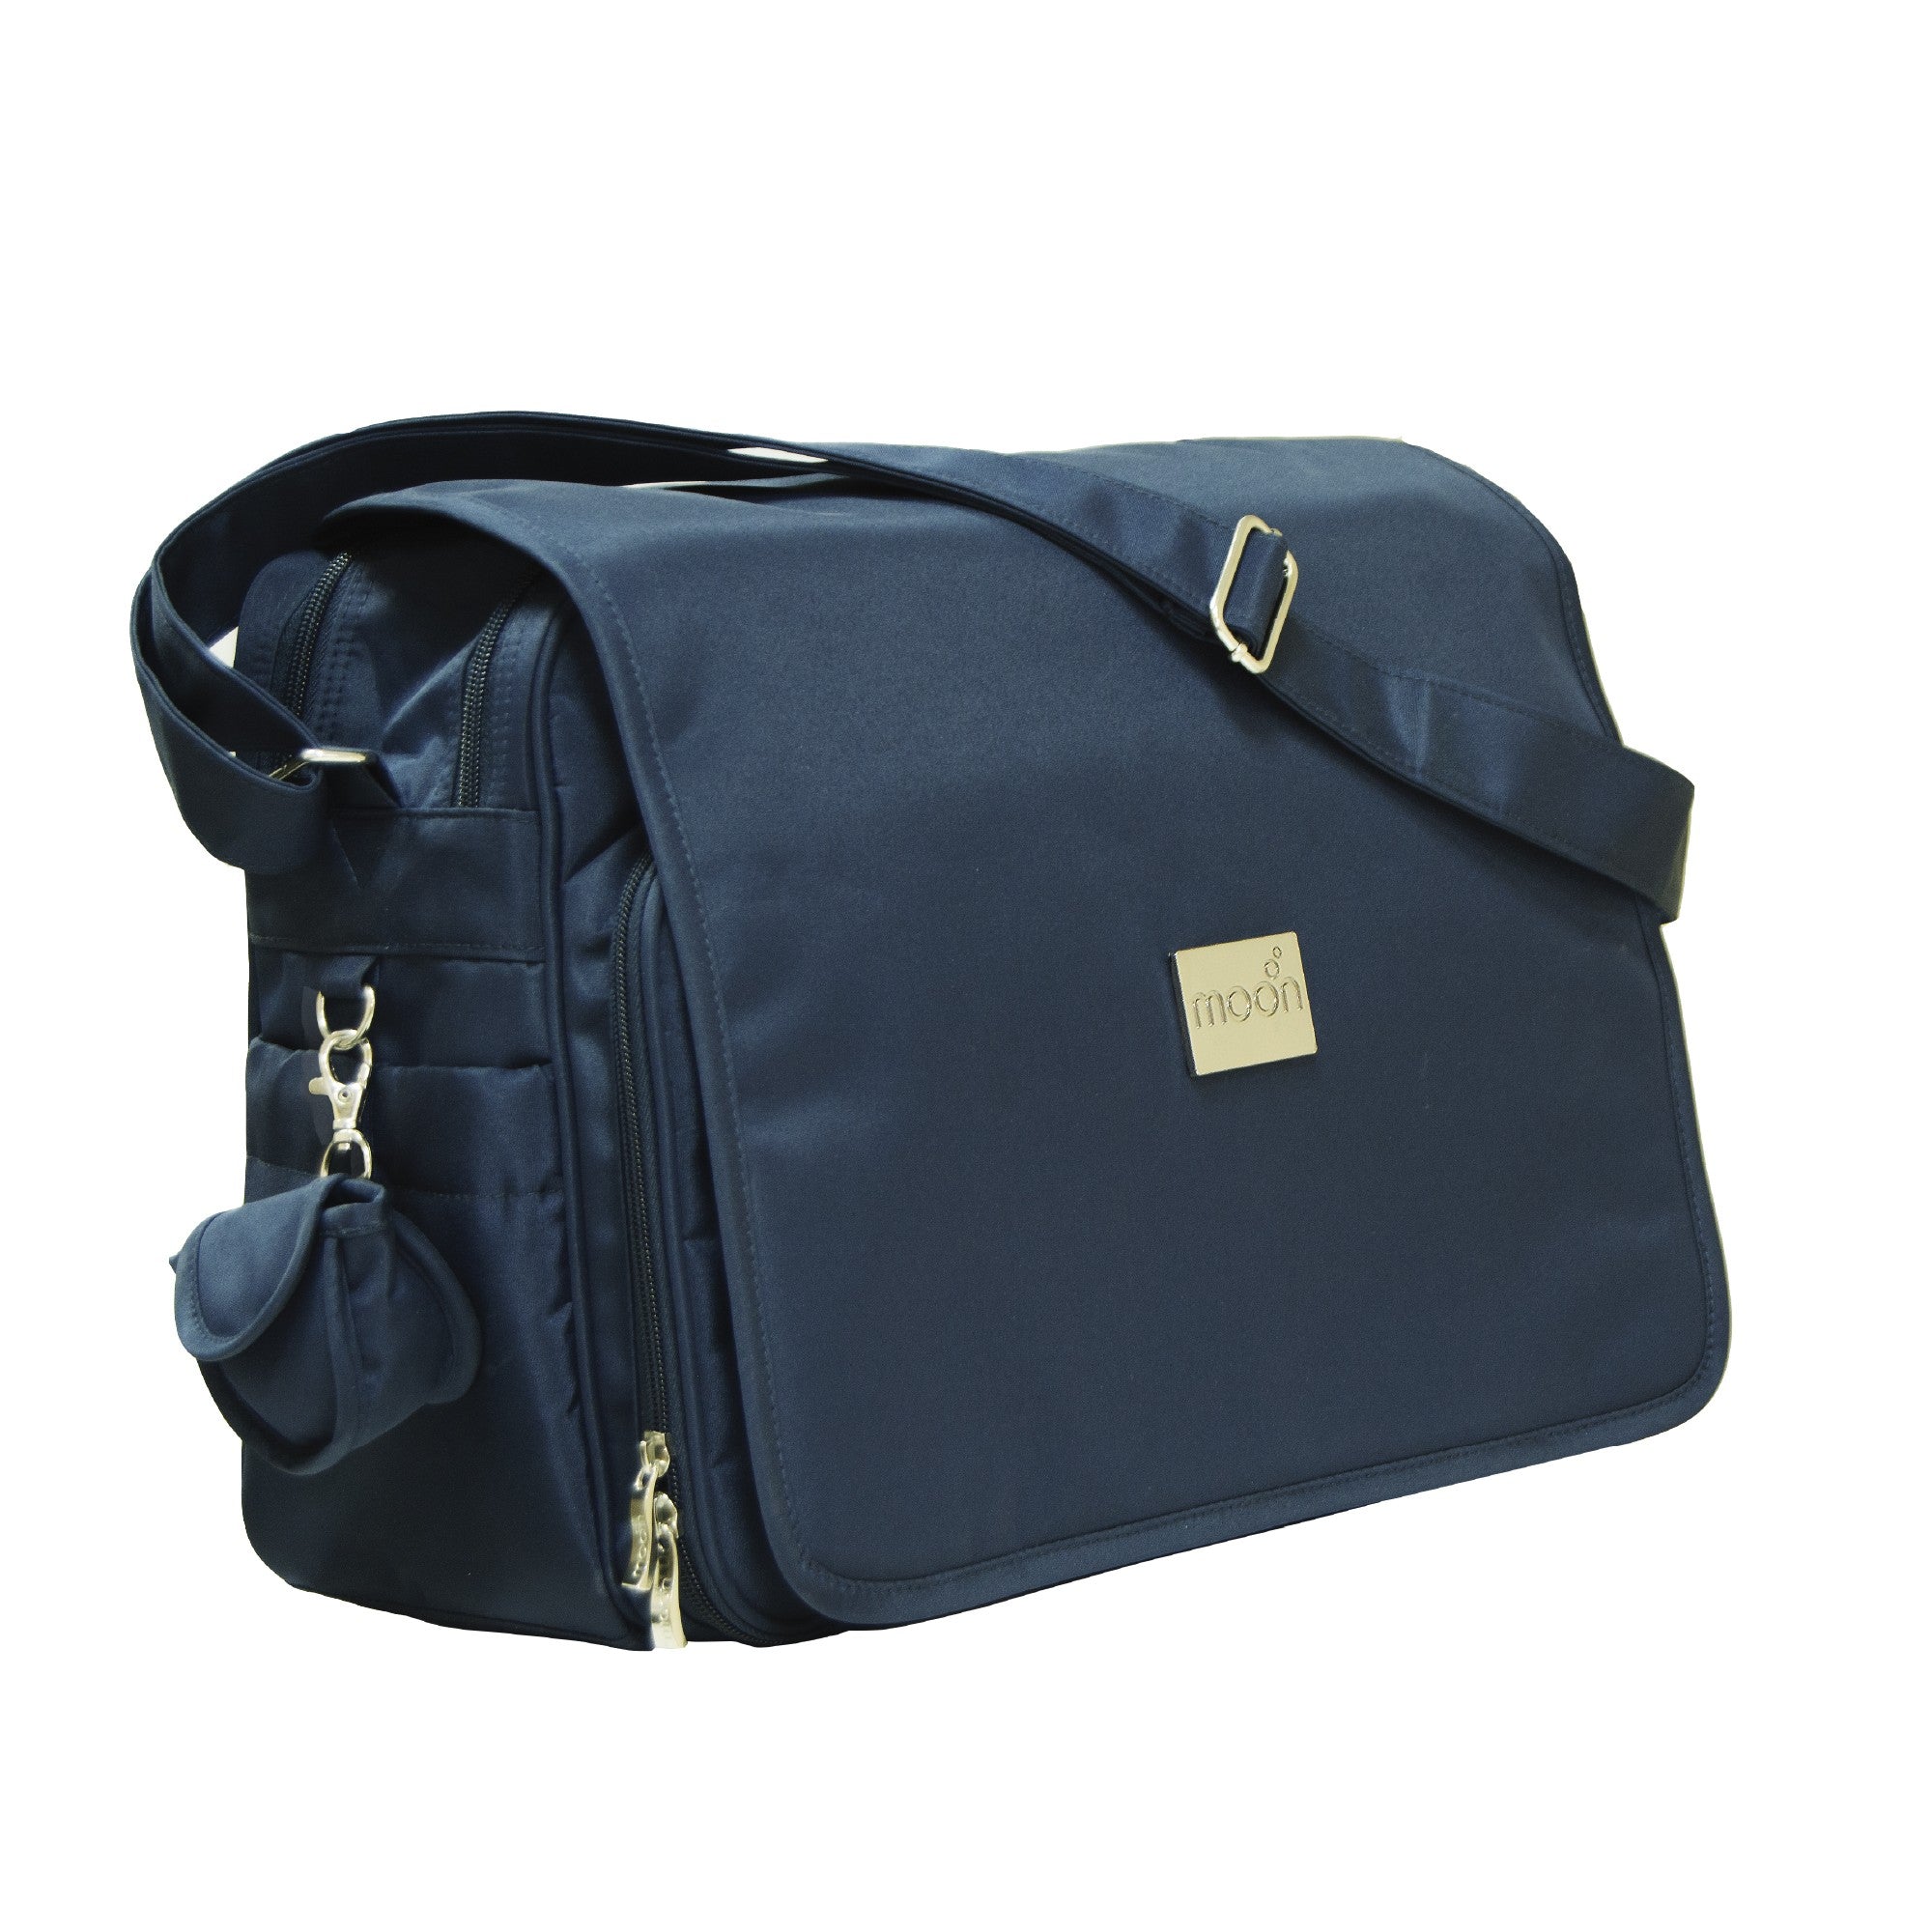 Moon 4Ever Diaper Bags Navy Blue Birth to Adult